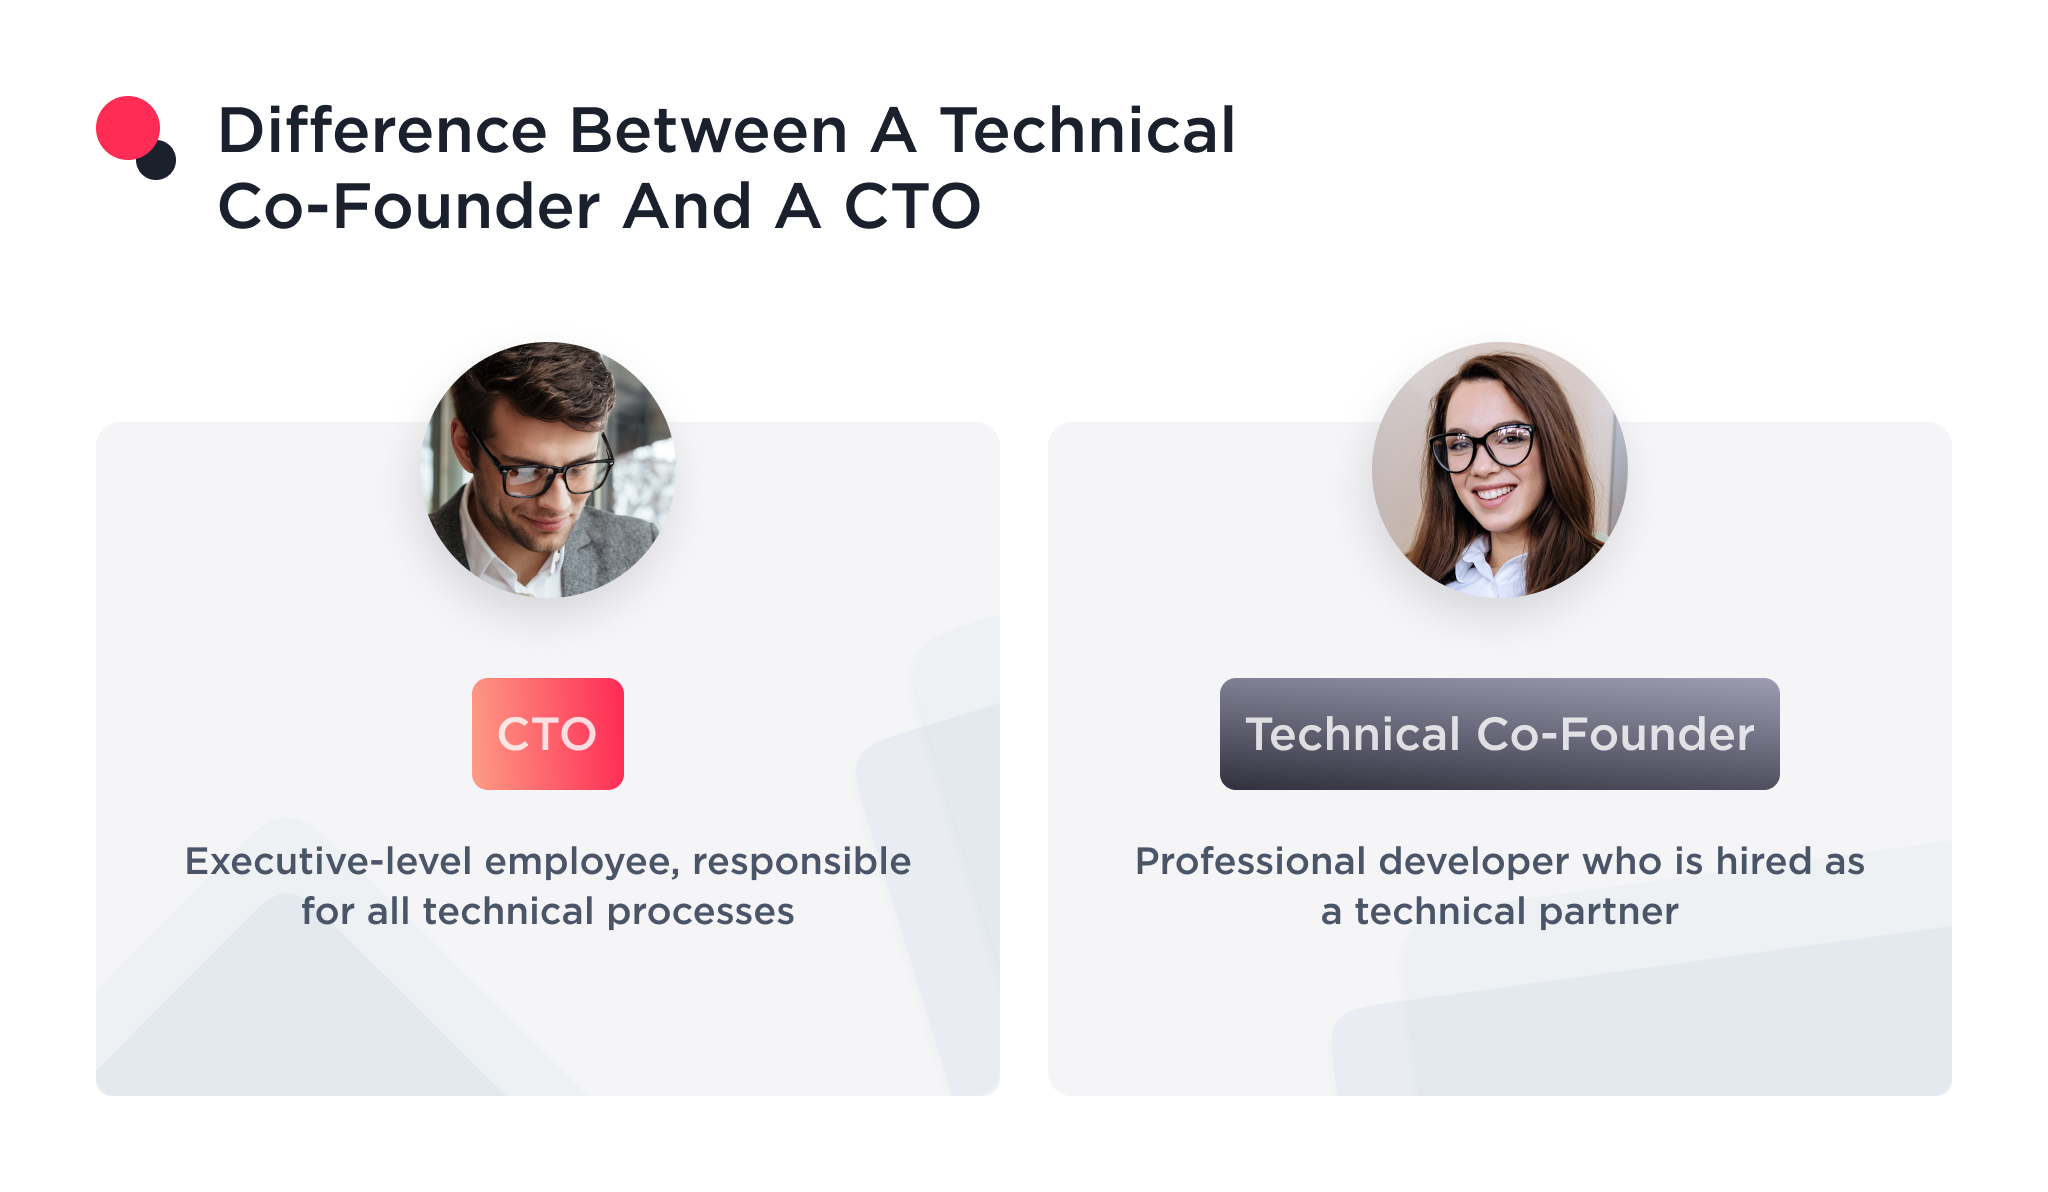 The picture shows the difference between a technical co-founder and a chief technical officer